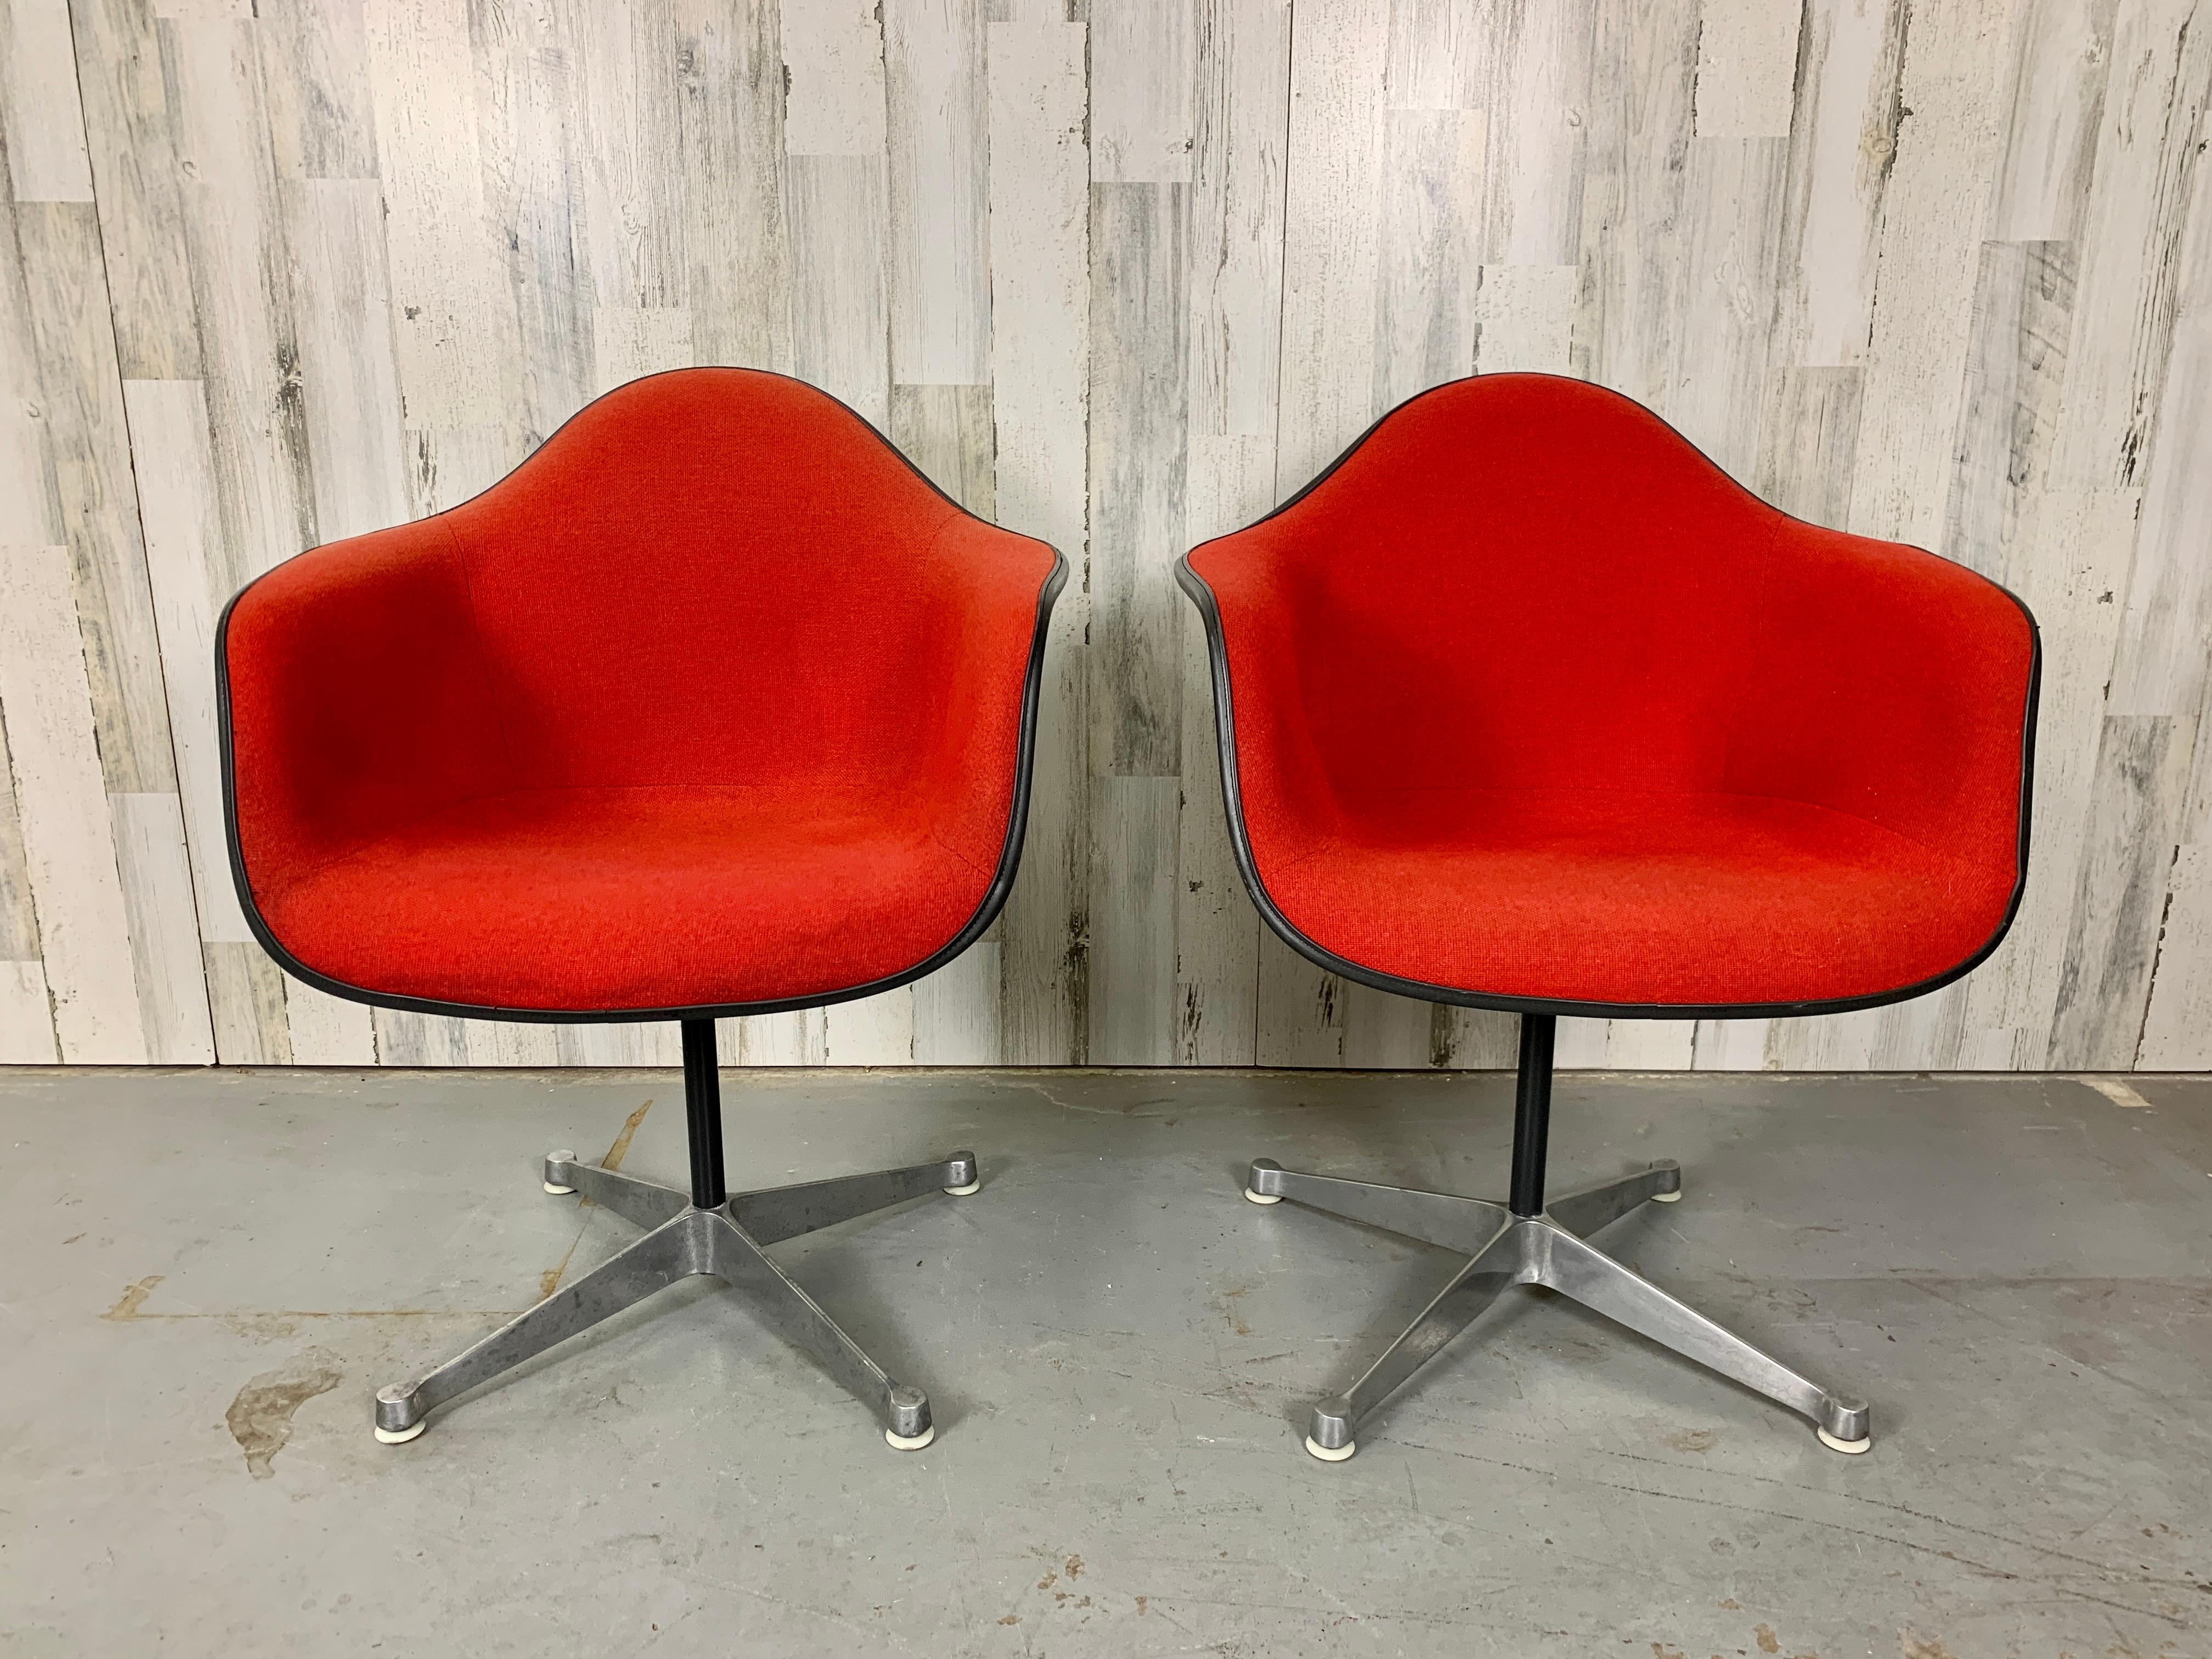 Pair of Iconic Eames for Herman Miller fiberglass shell chairs with original red wool padded upholstery.